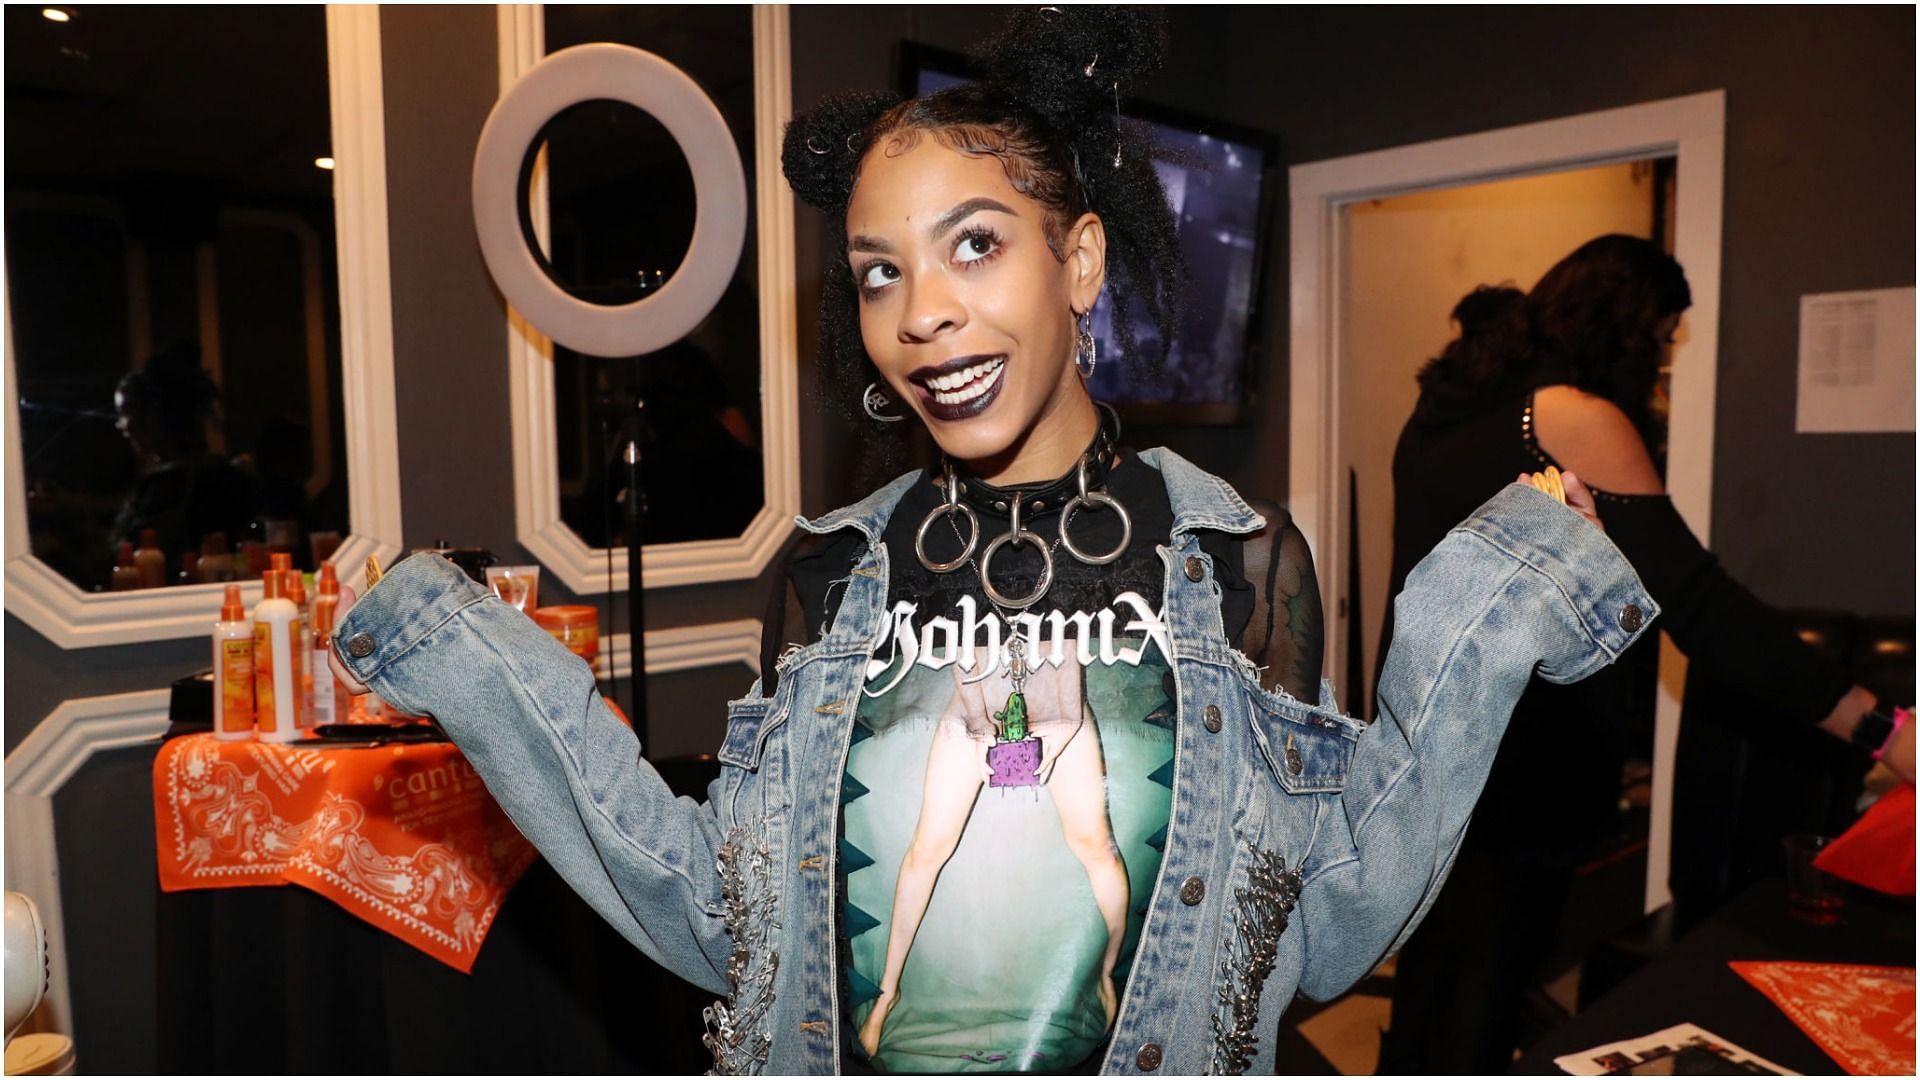 Rico Nasty attends The 7th Annual ICM x Cantu Official SXSW Showcase Presented by Bumble at The Belmont on March 15, 2018, in Austin, Texas (Image via Getty Images)